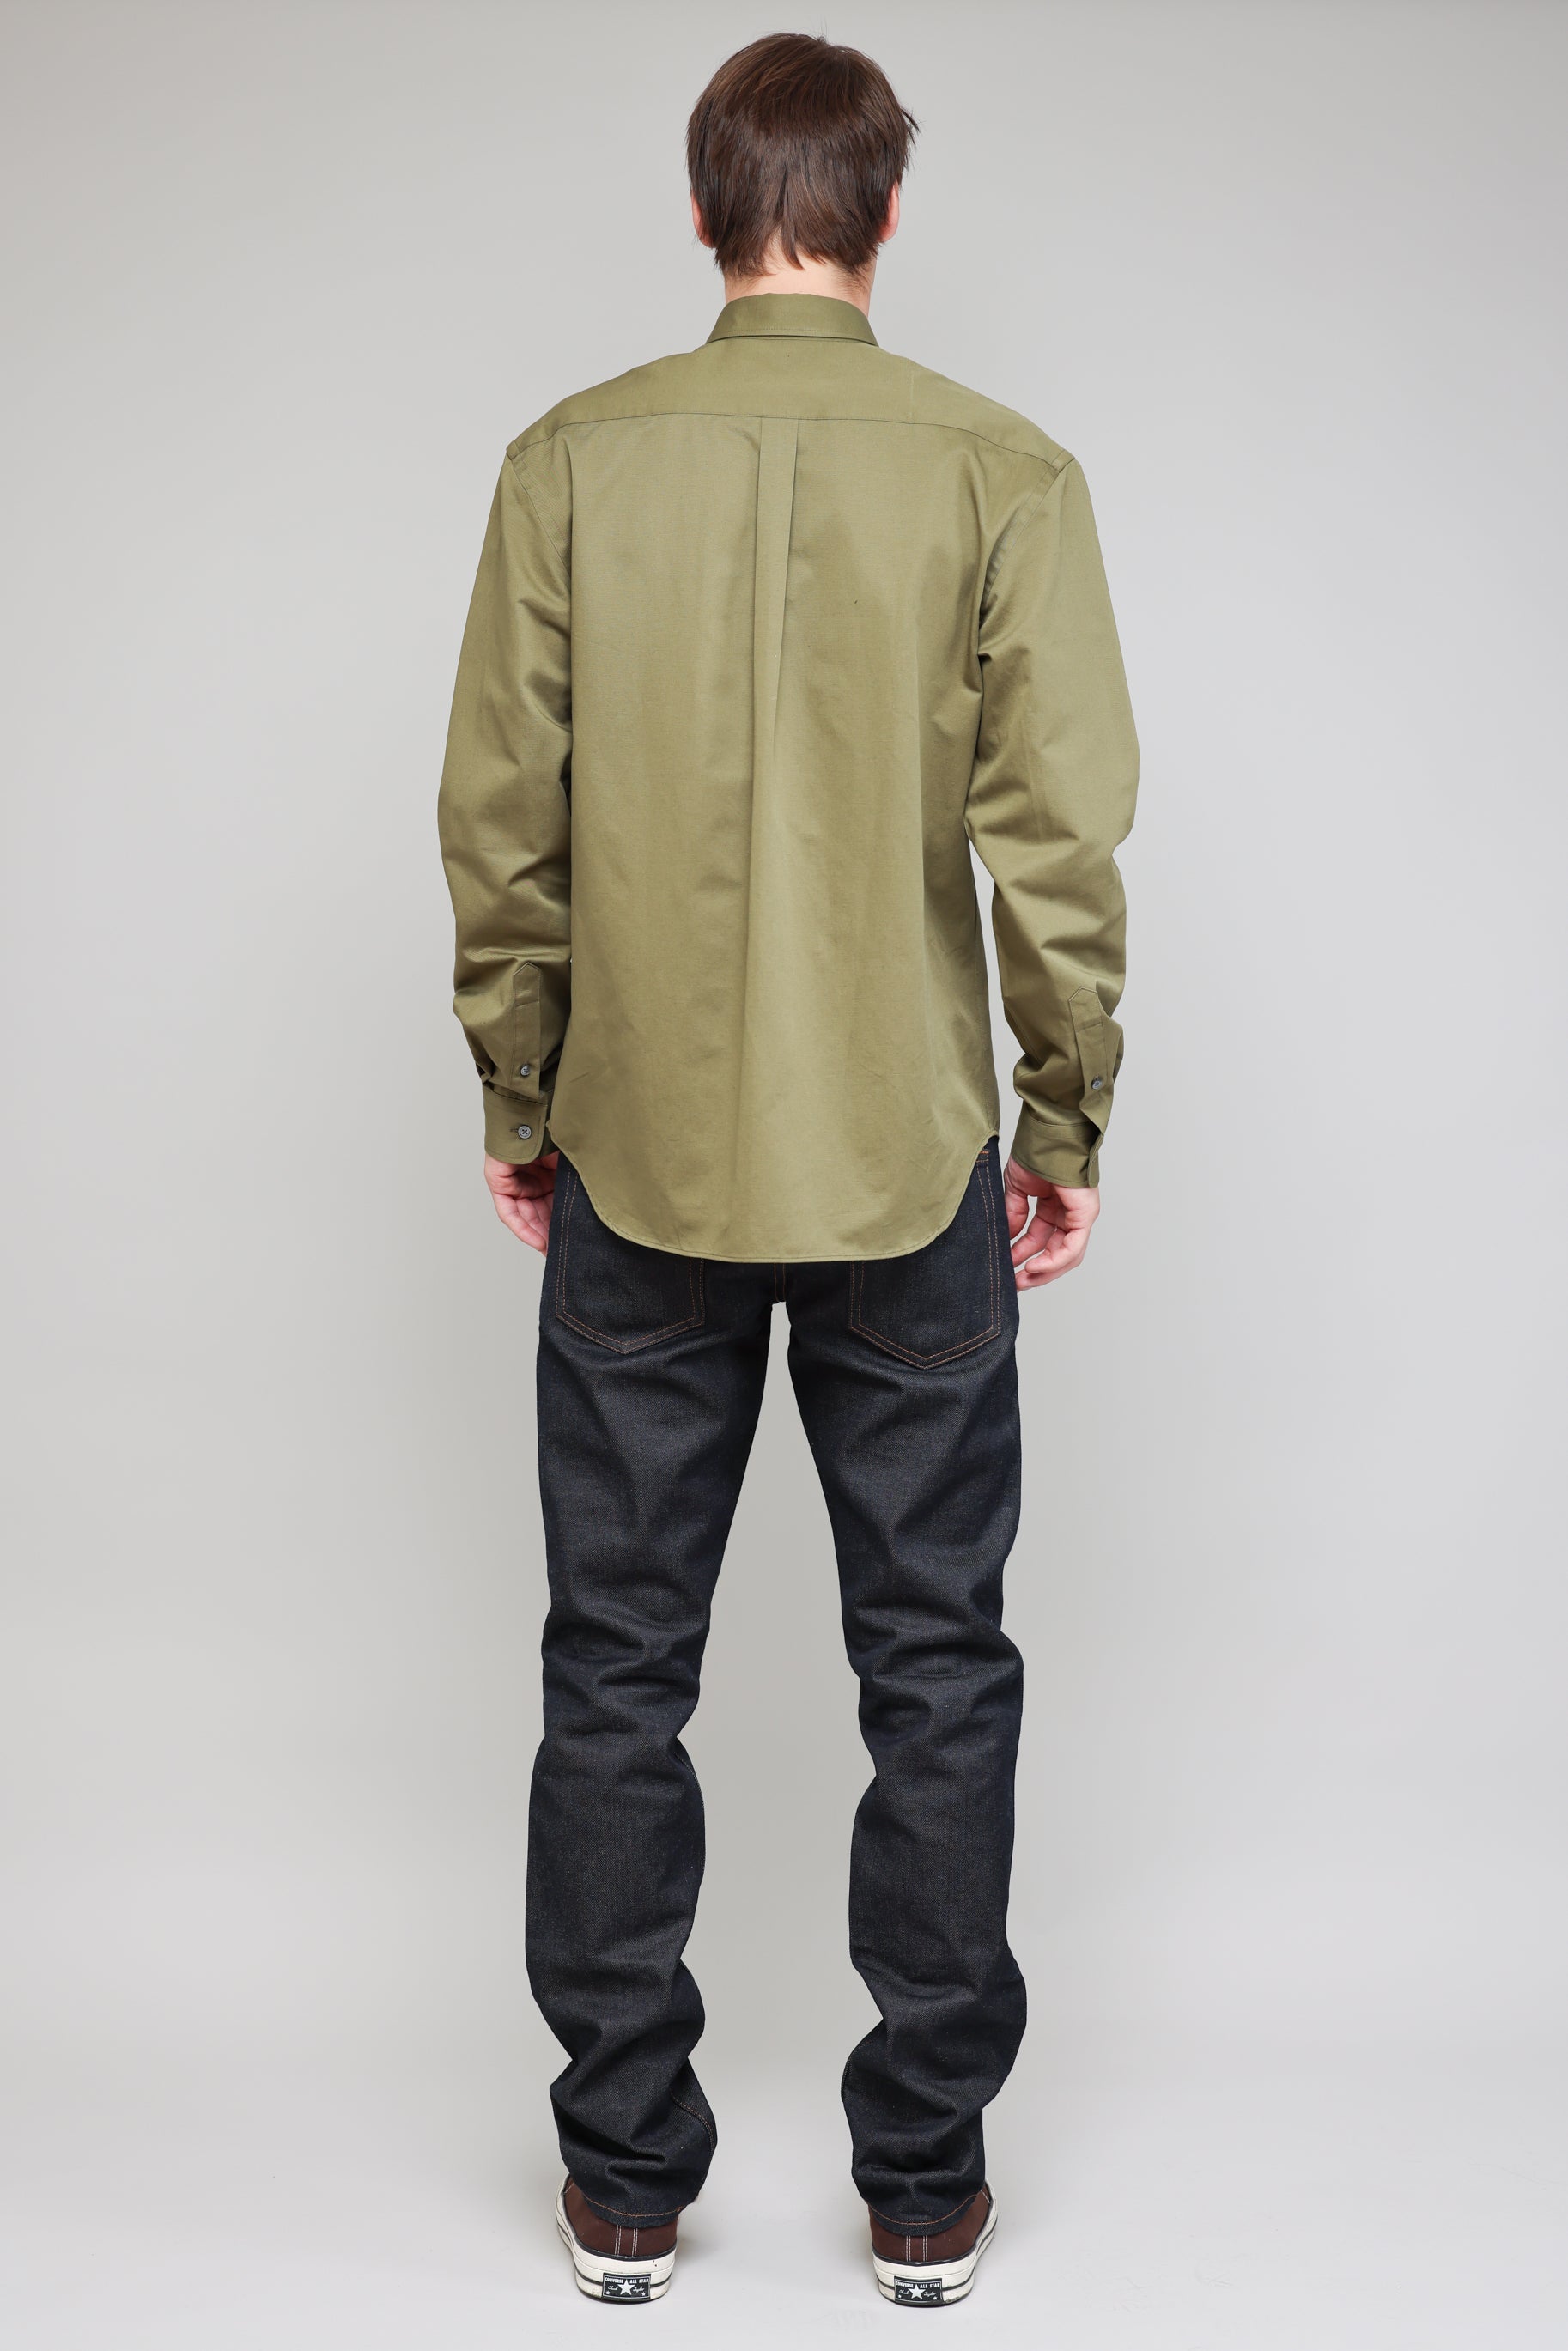 Japanese Military Cloth in Army Green 03